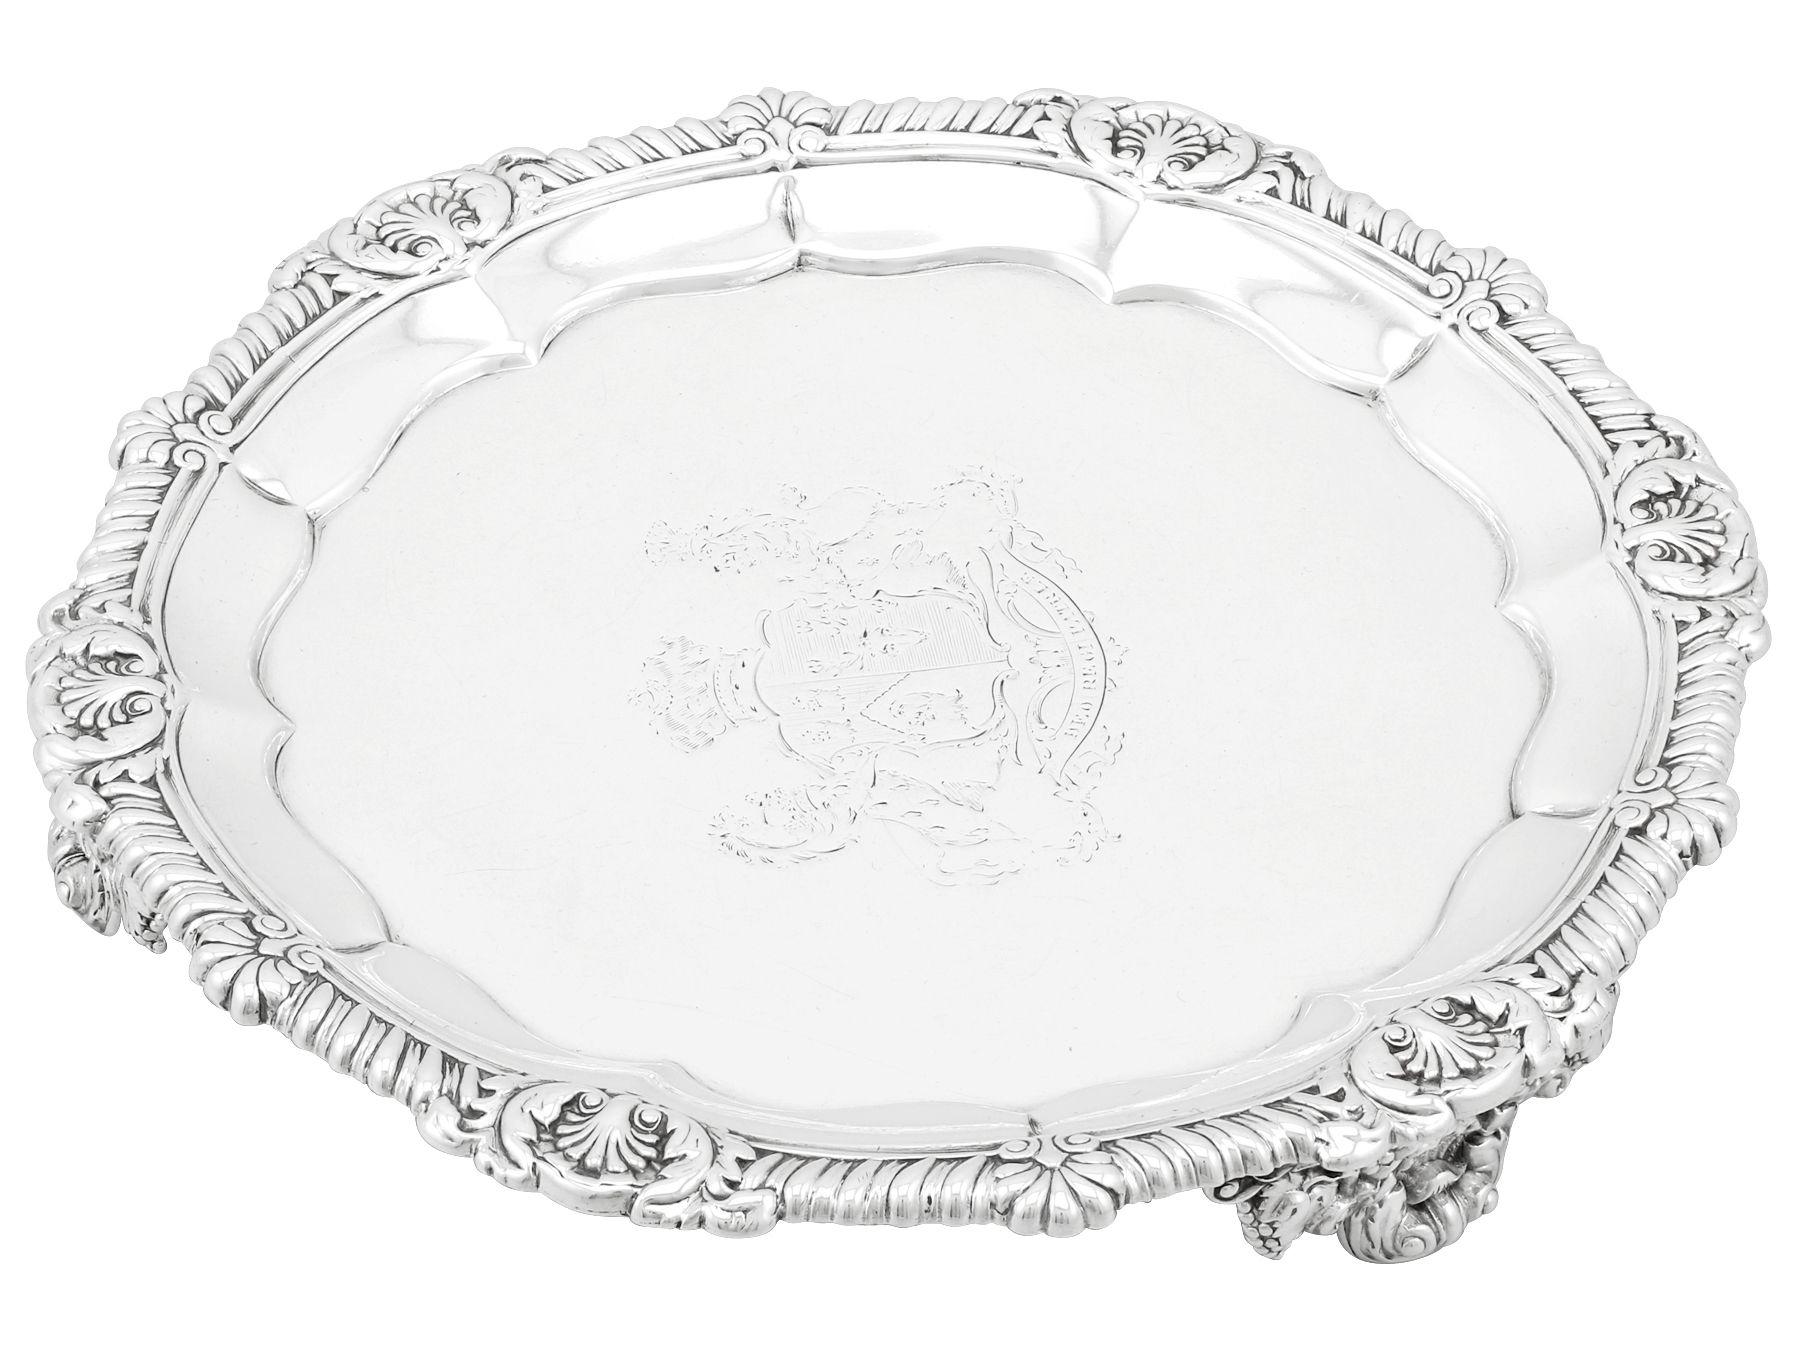 An exceptional, fine and impressive antique George IV English sterling silver salver made by Paul Storr; an addition to our range of collectable silverware.

This exceptional antique sterling silver salver has a plain circular shaped form.

The